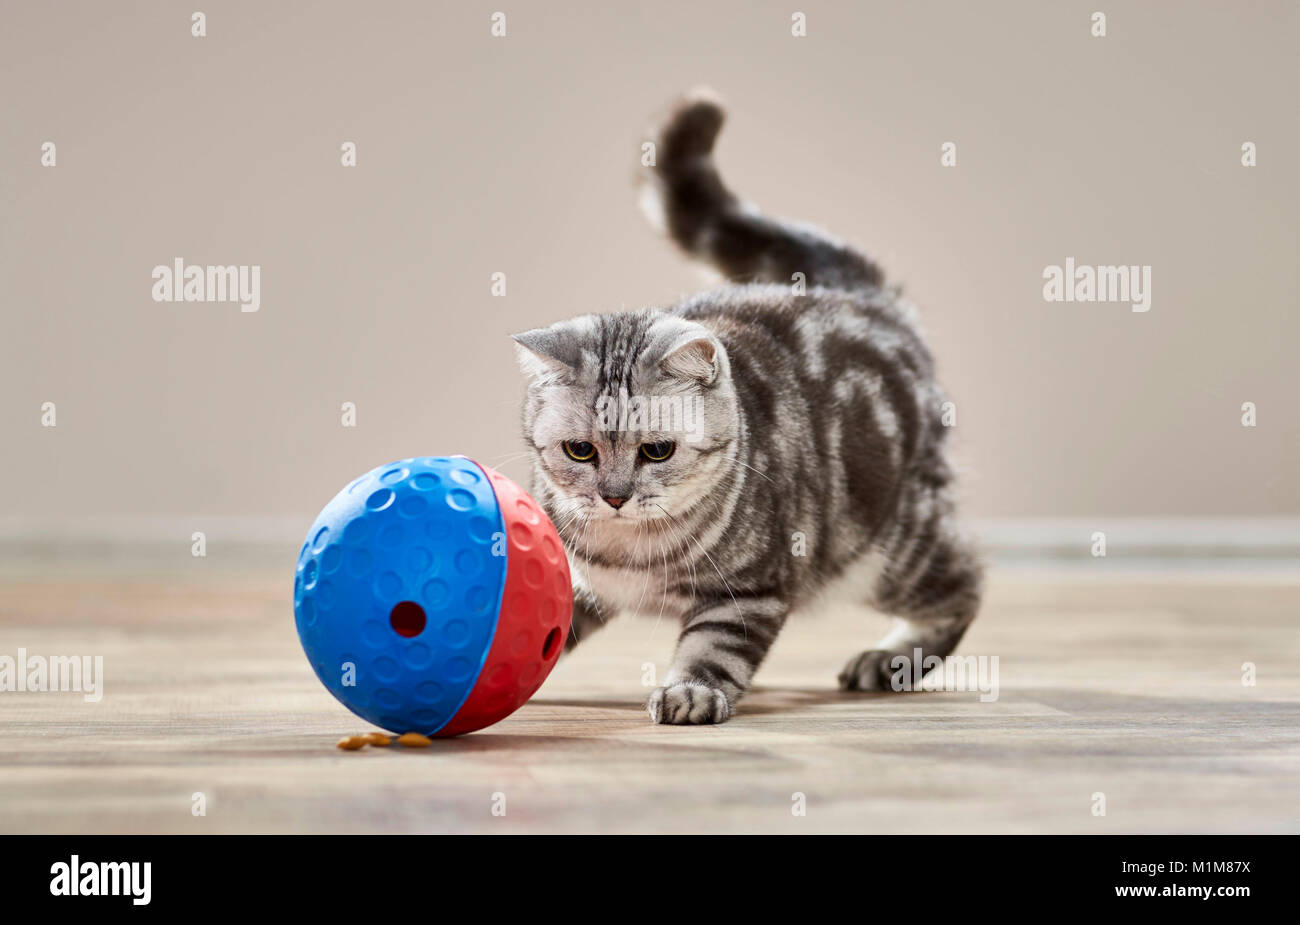 British Shorthair cat. Tabby adult playing with food-dispensing toy. Germany Stock Photo